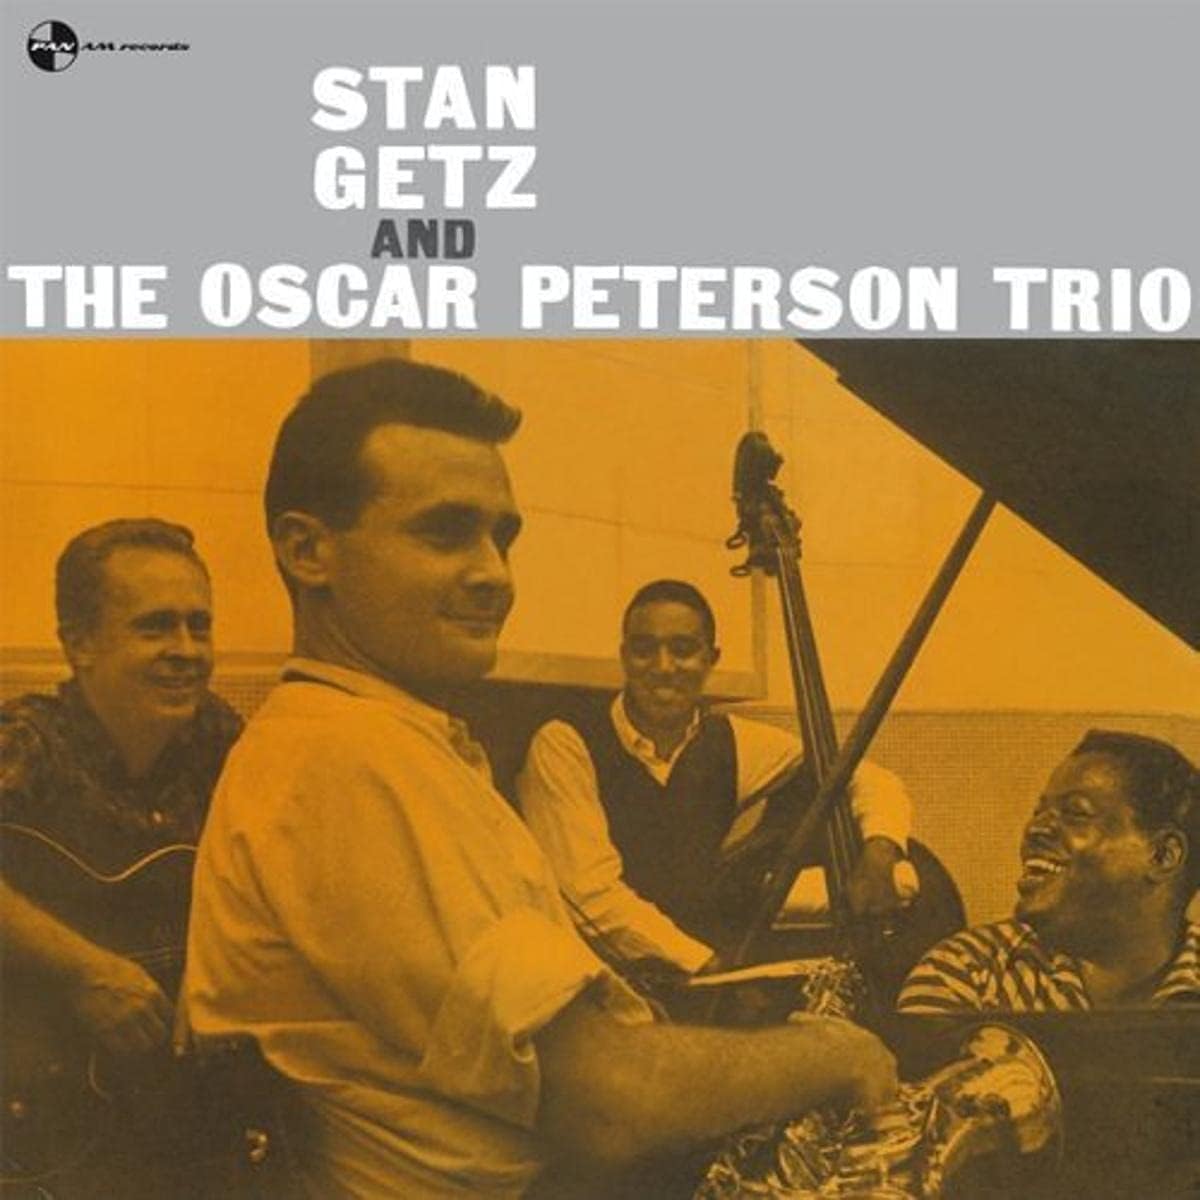 Stan Getz and Oscar Peterson